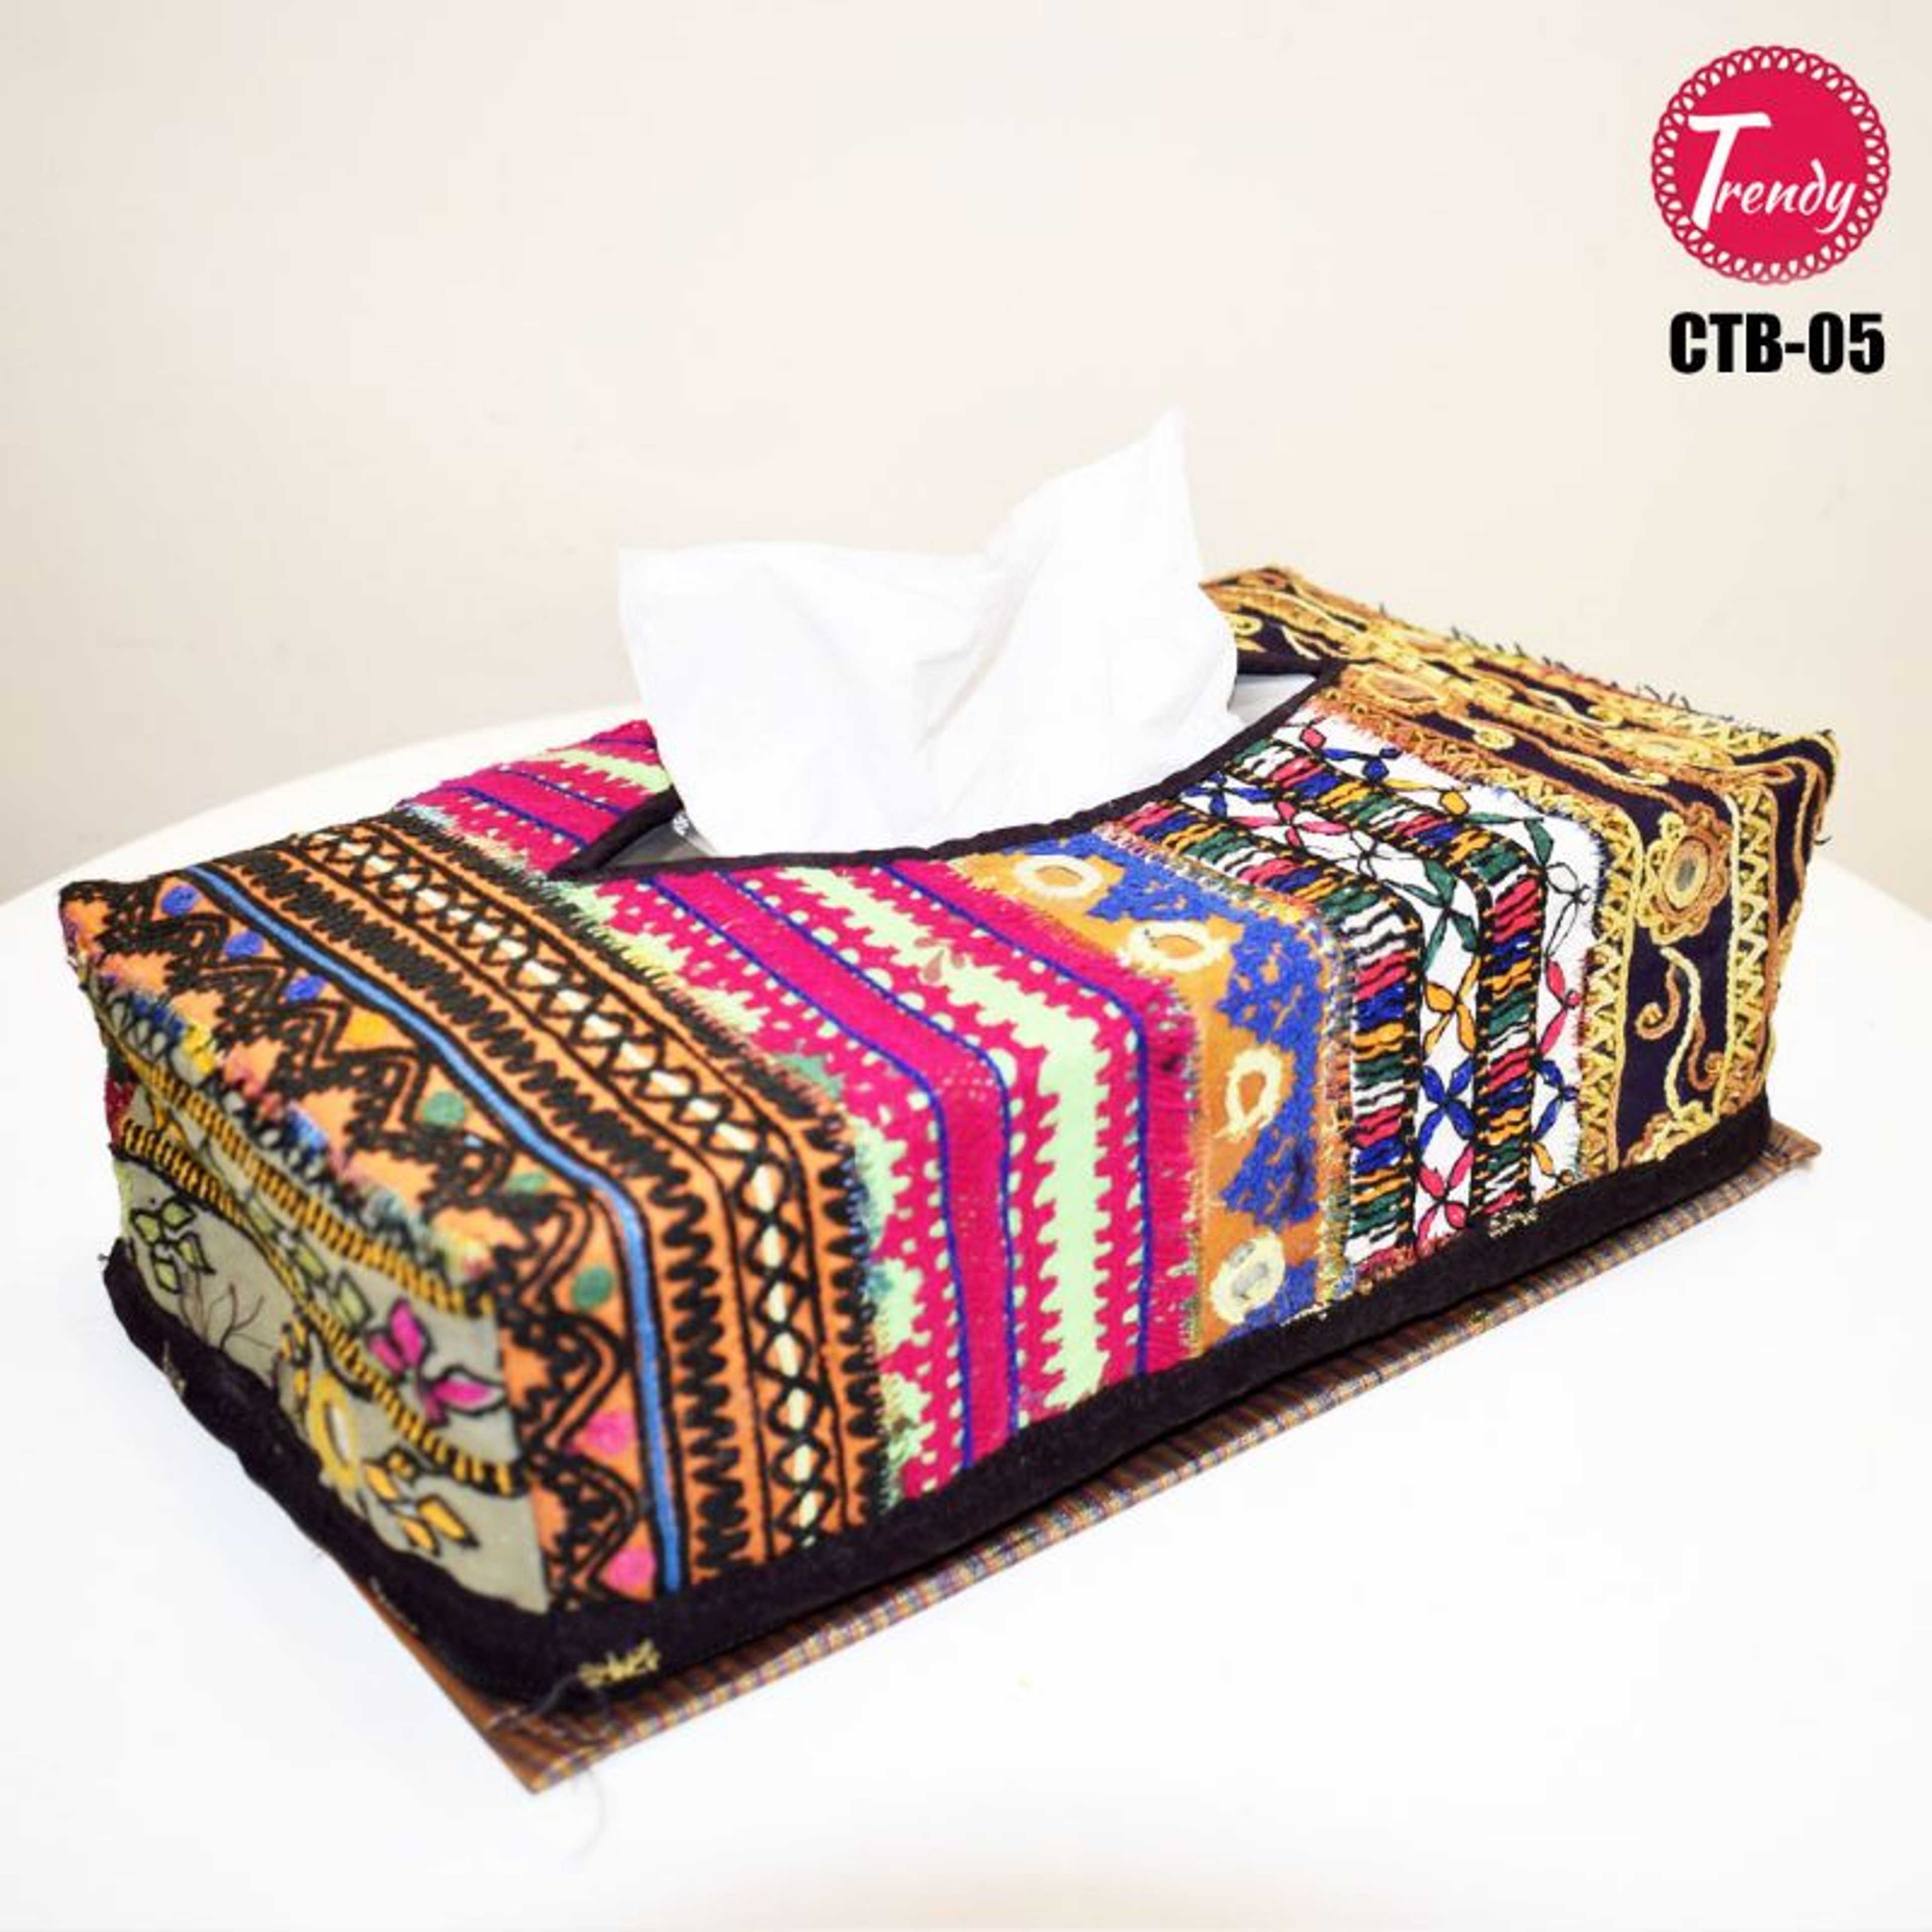 Sindhi Hand Embroidery Fabric Tissue Box Cover CTB-05